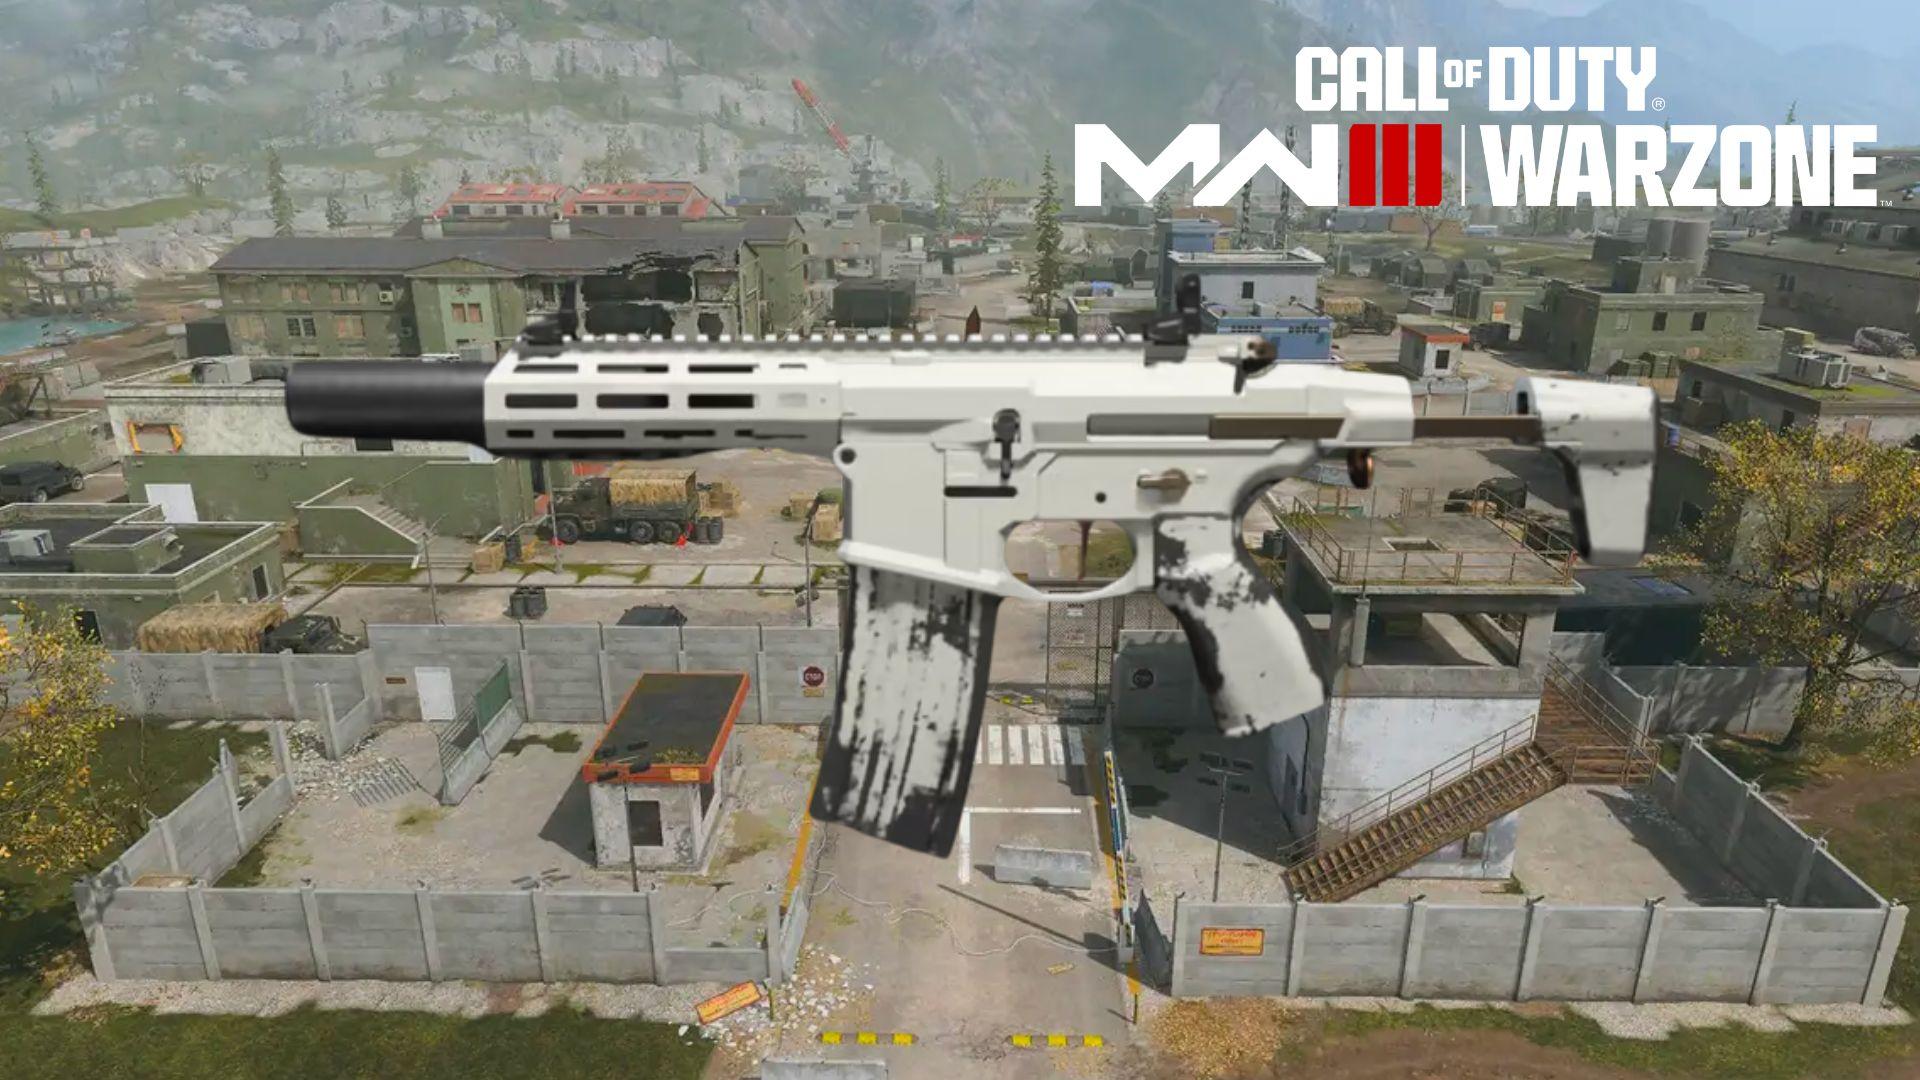 White Chimera Assault Rifle in Warzone on Urzikstan map